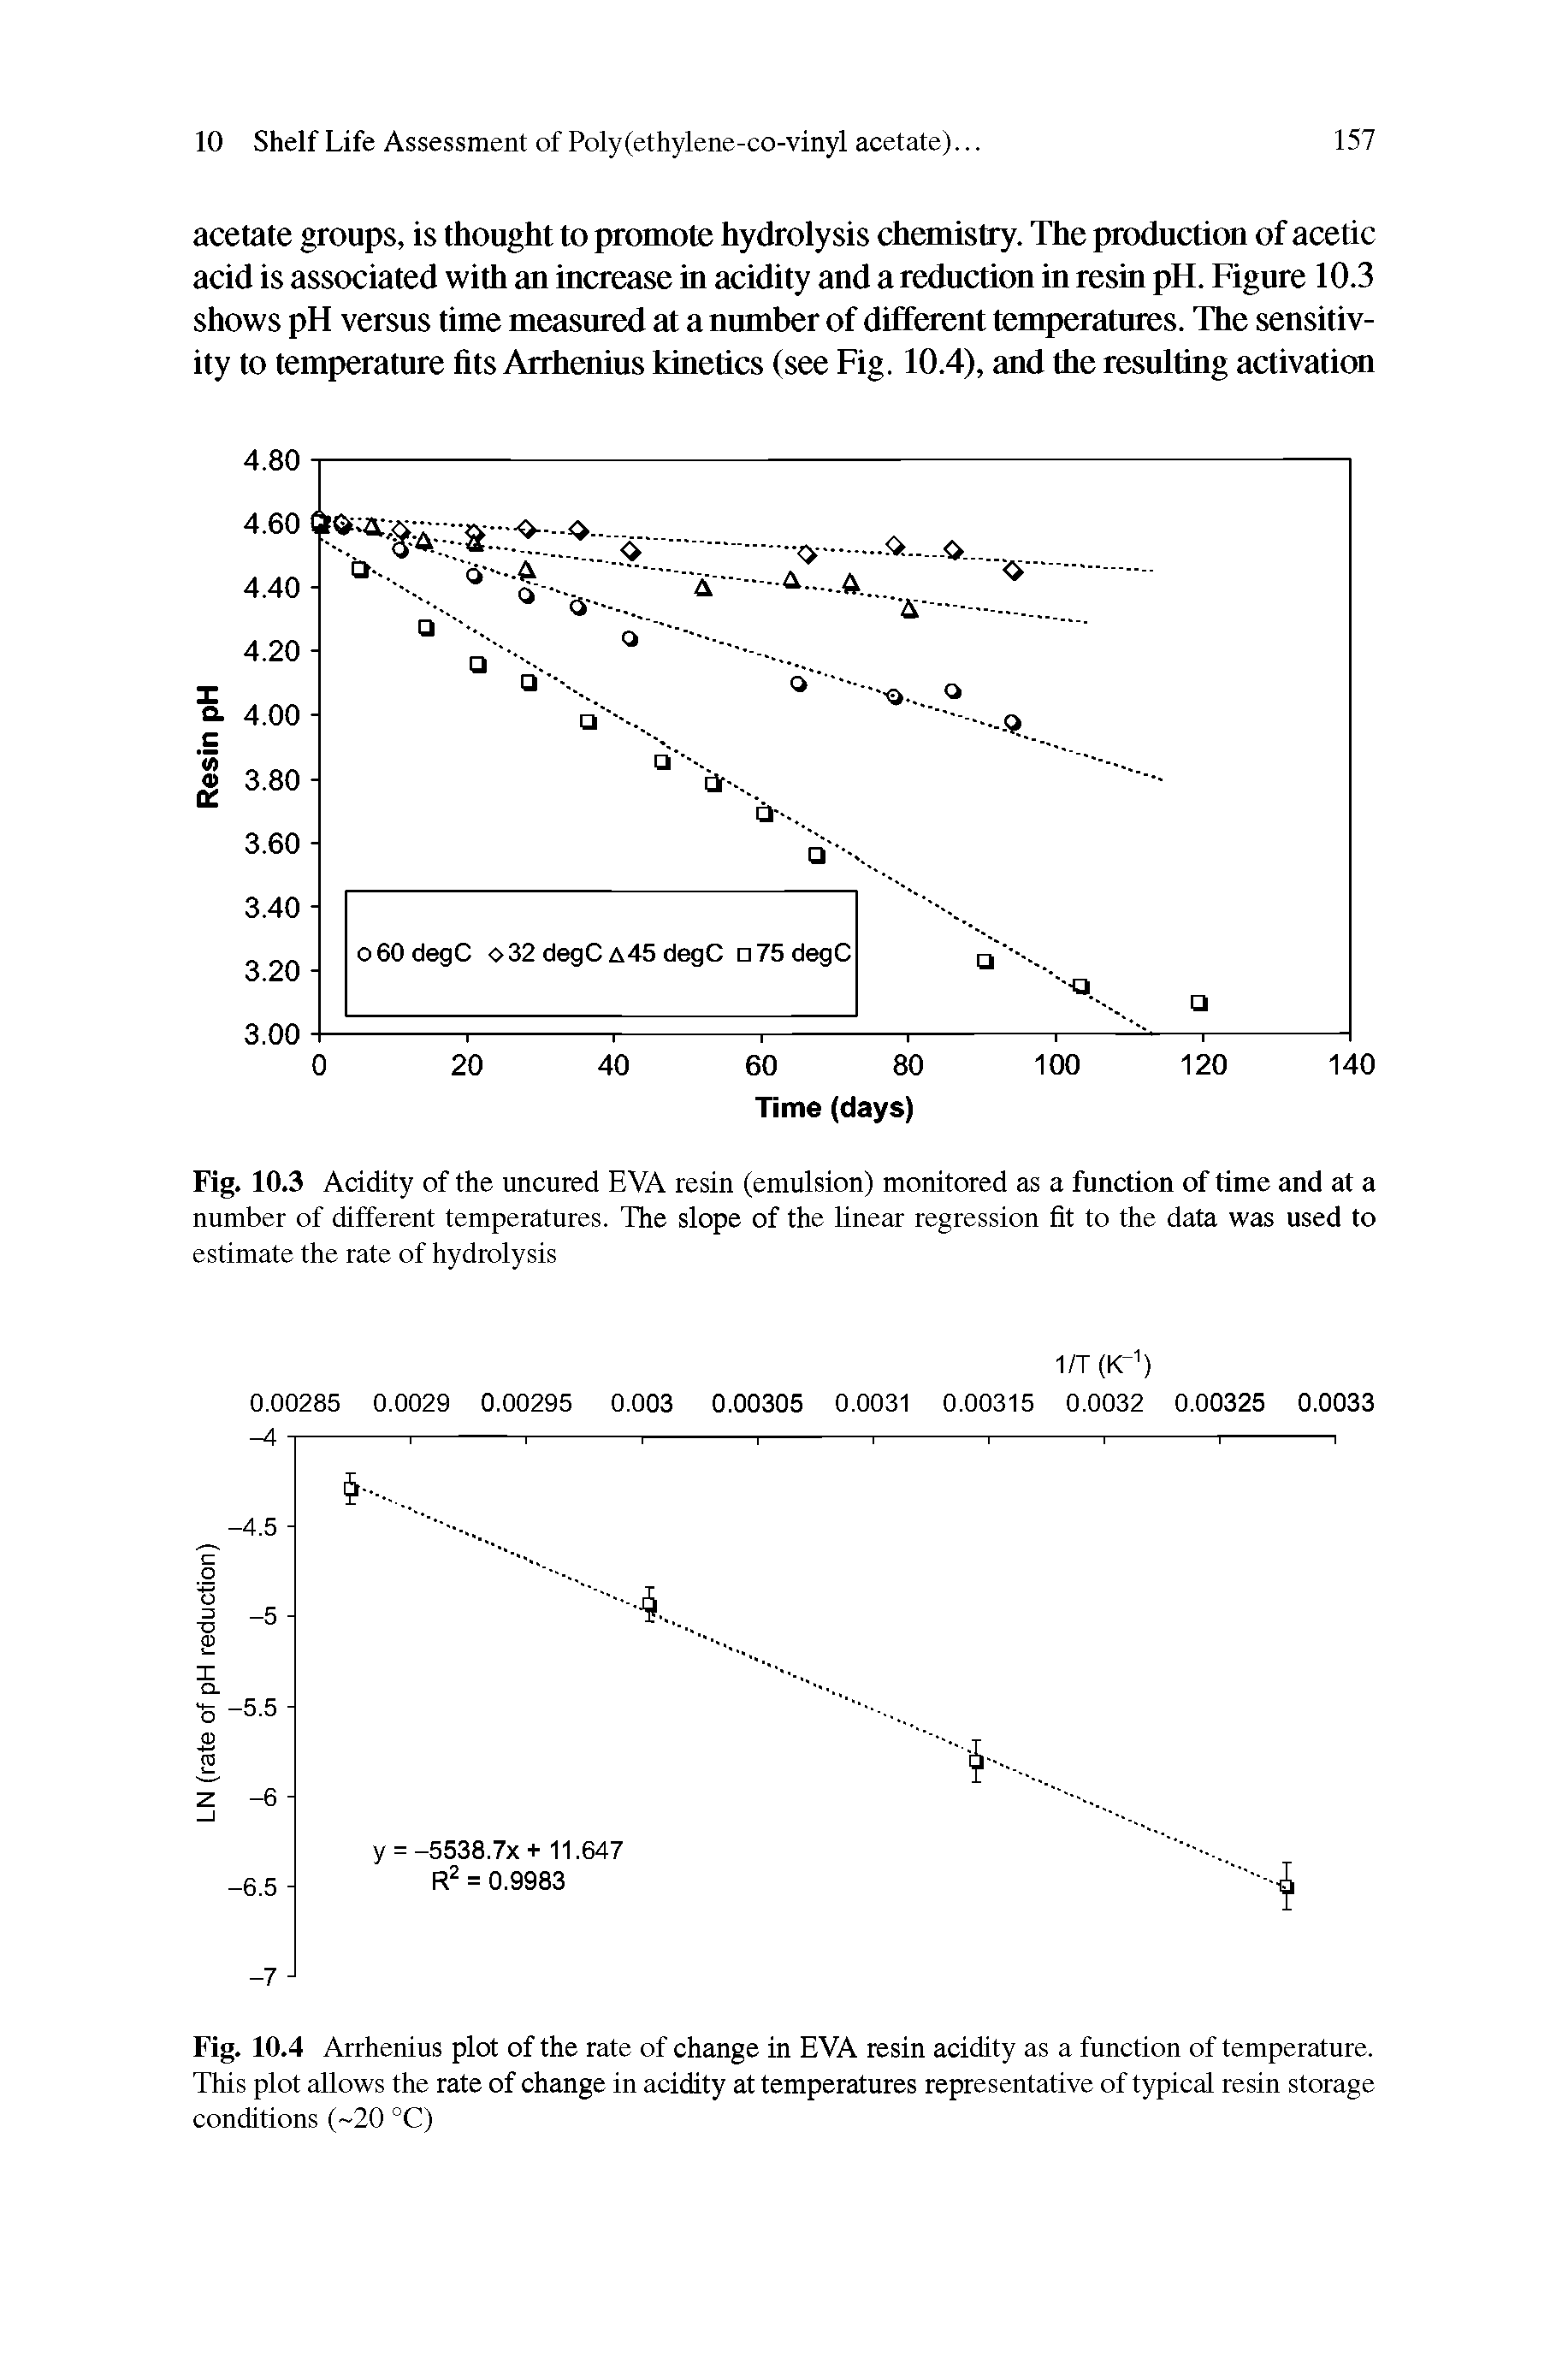 Fig. 10.4 Arrhenius plot of the rate of change in EVA resin acidity as a function of temperature. This plot allows the rate of change in acidity at temperatures representative of typical resin storage conditions ( 20 °C)...